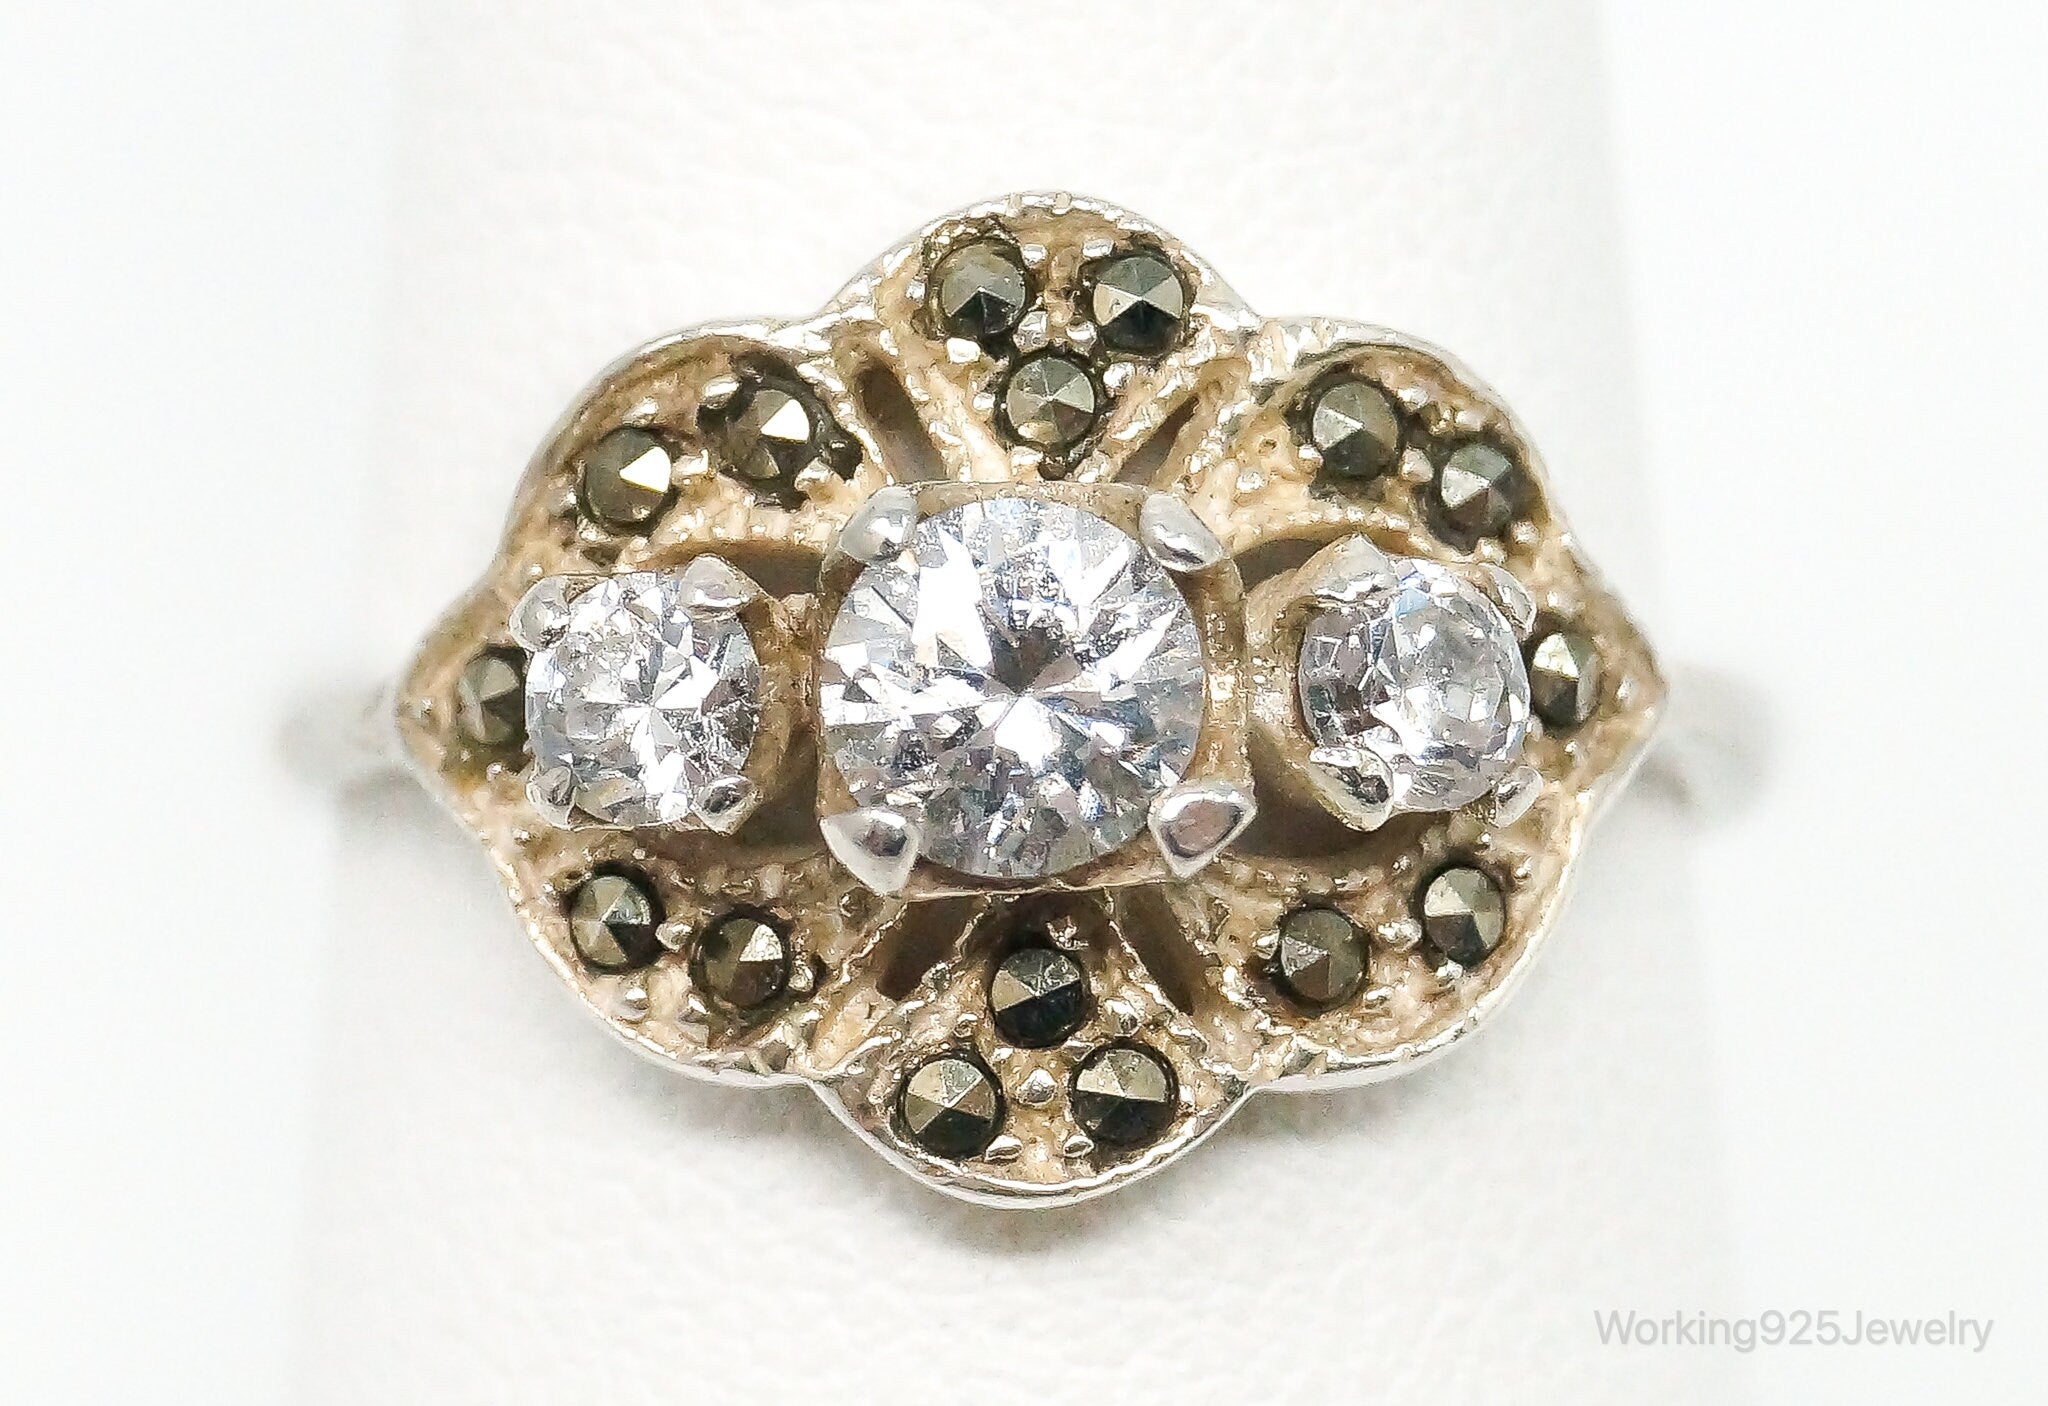 Vintage Cubic Zirconia Marcasite Sterling Silver Ring - Size 7